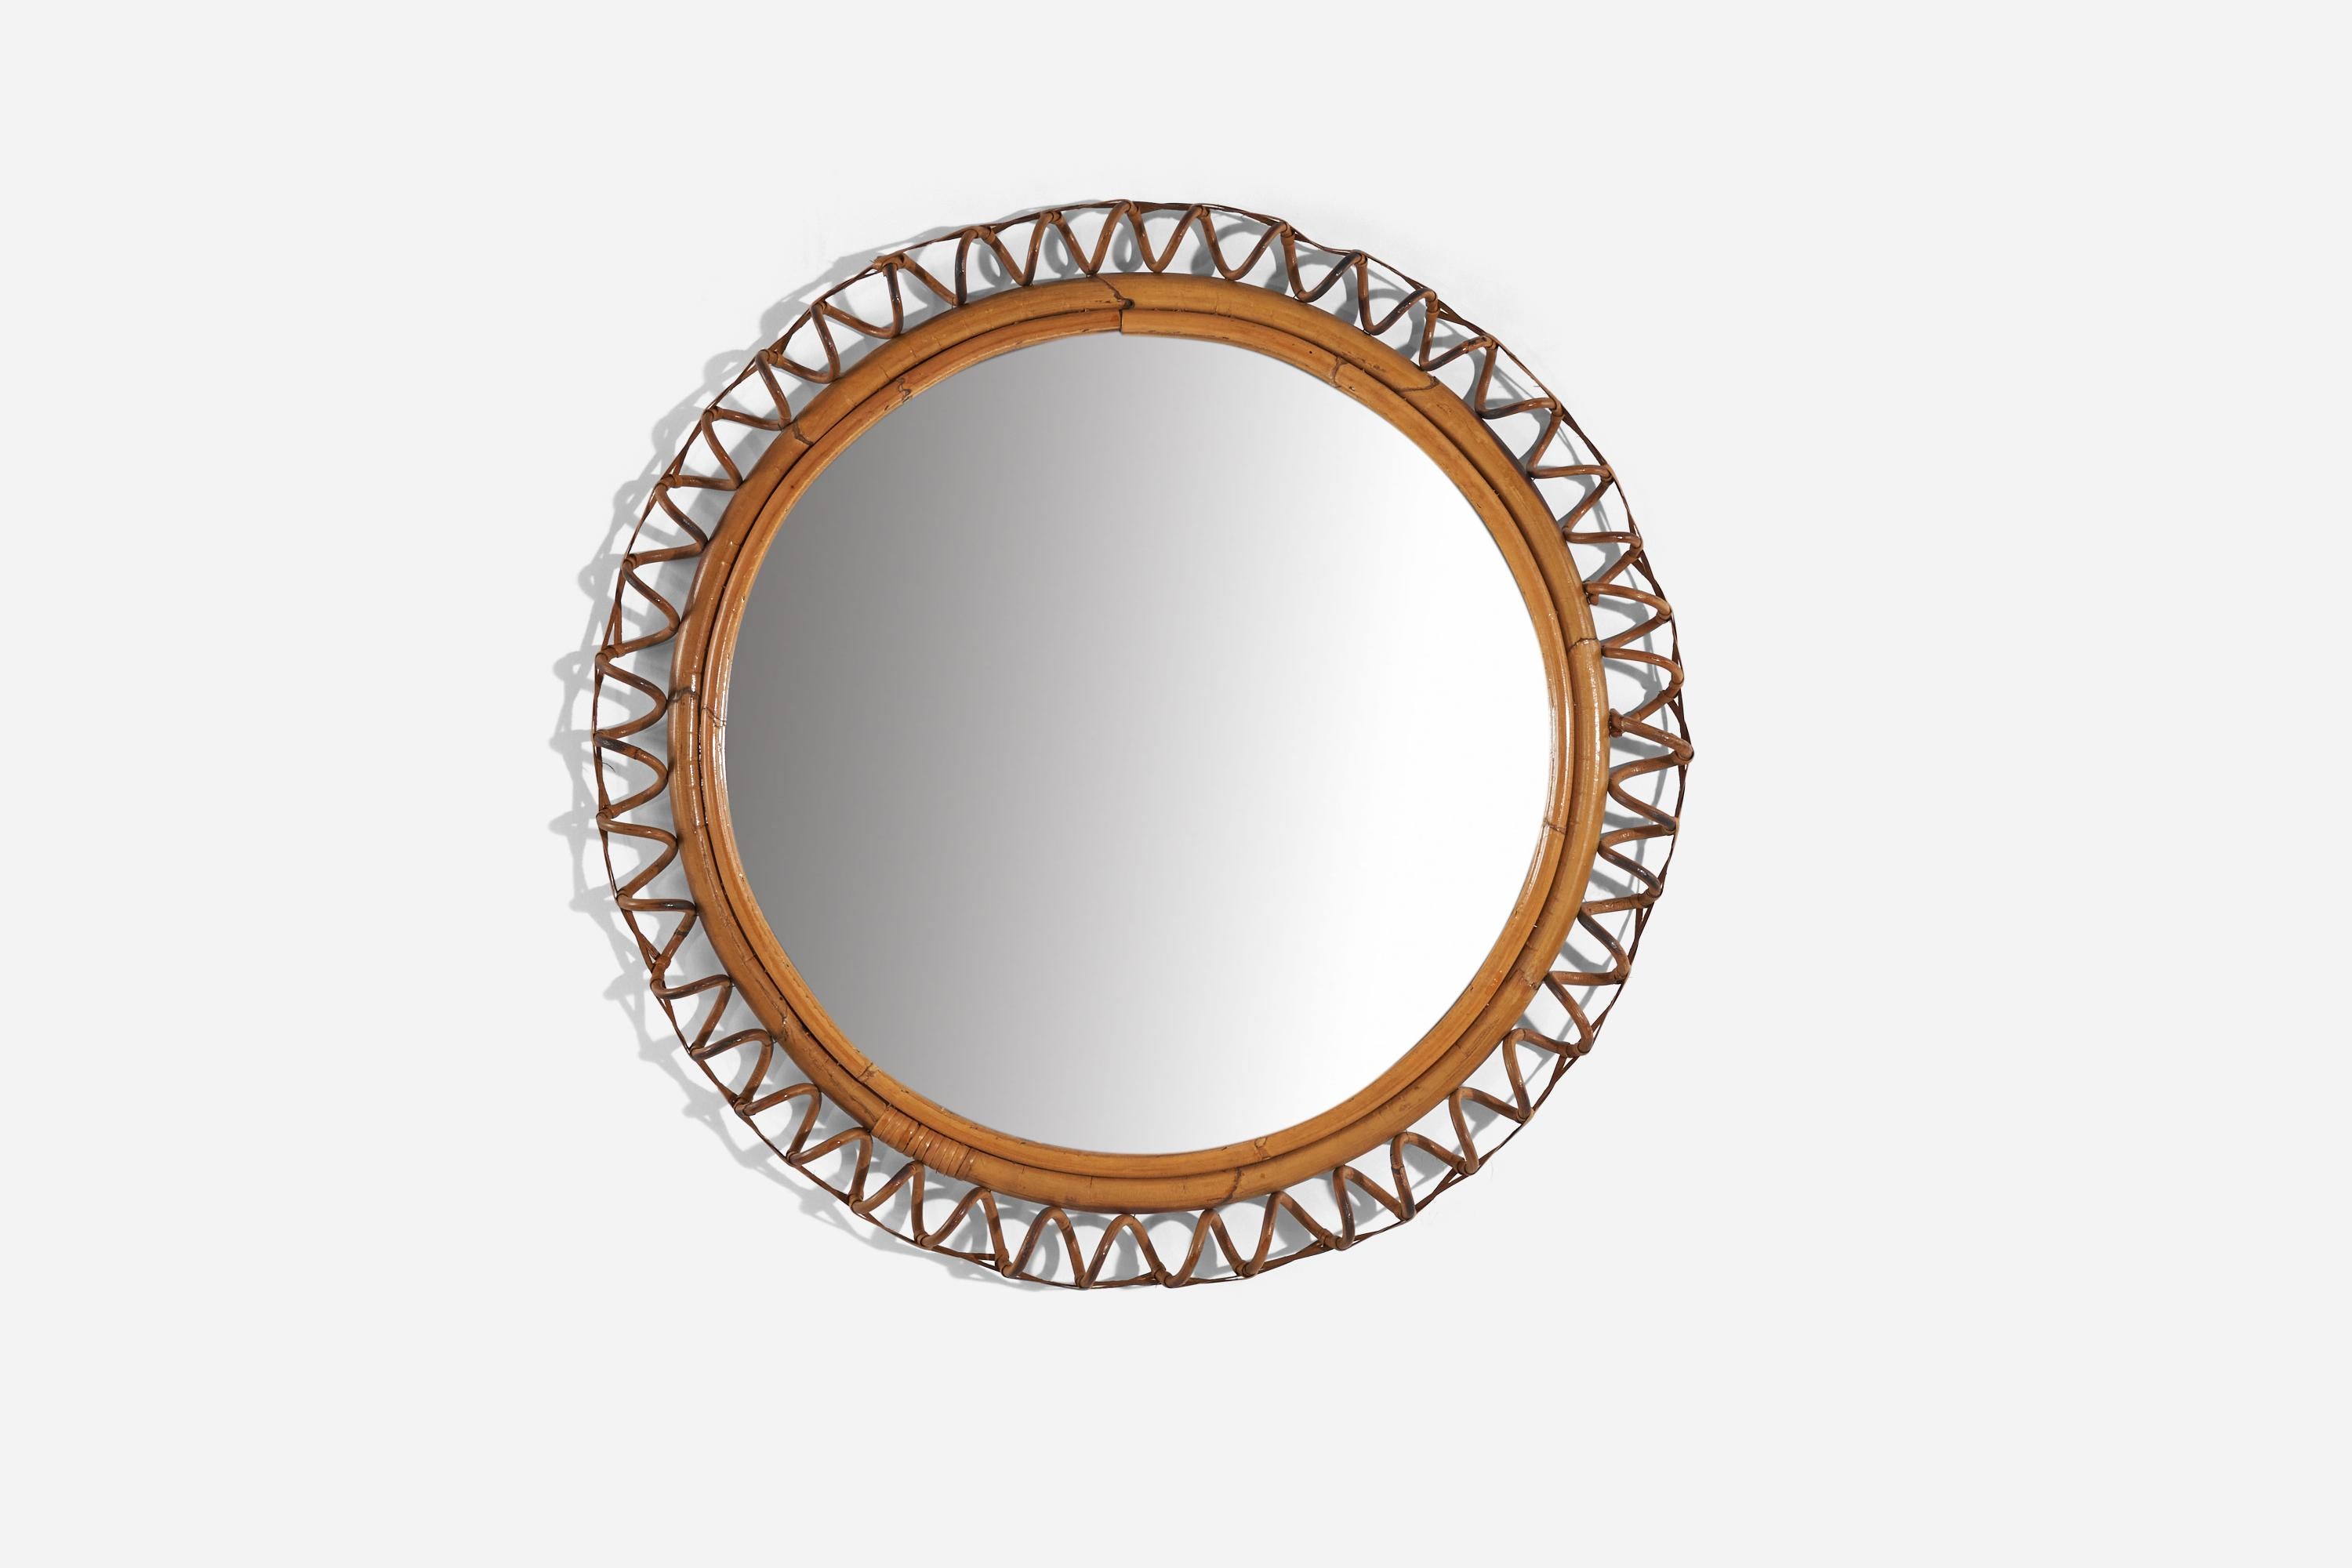 A circular, rattan and bamboo wall mirror designed and produced by an Italian designer, Italy, 1950s-1960s.
   